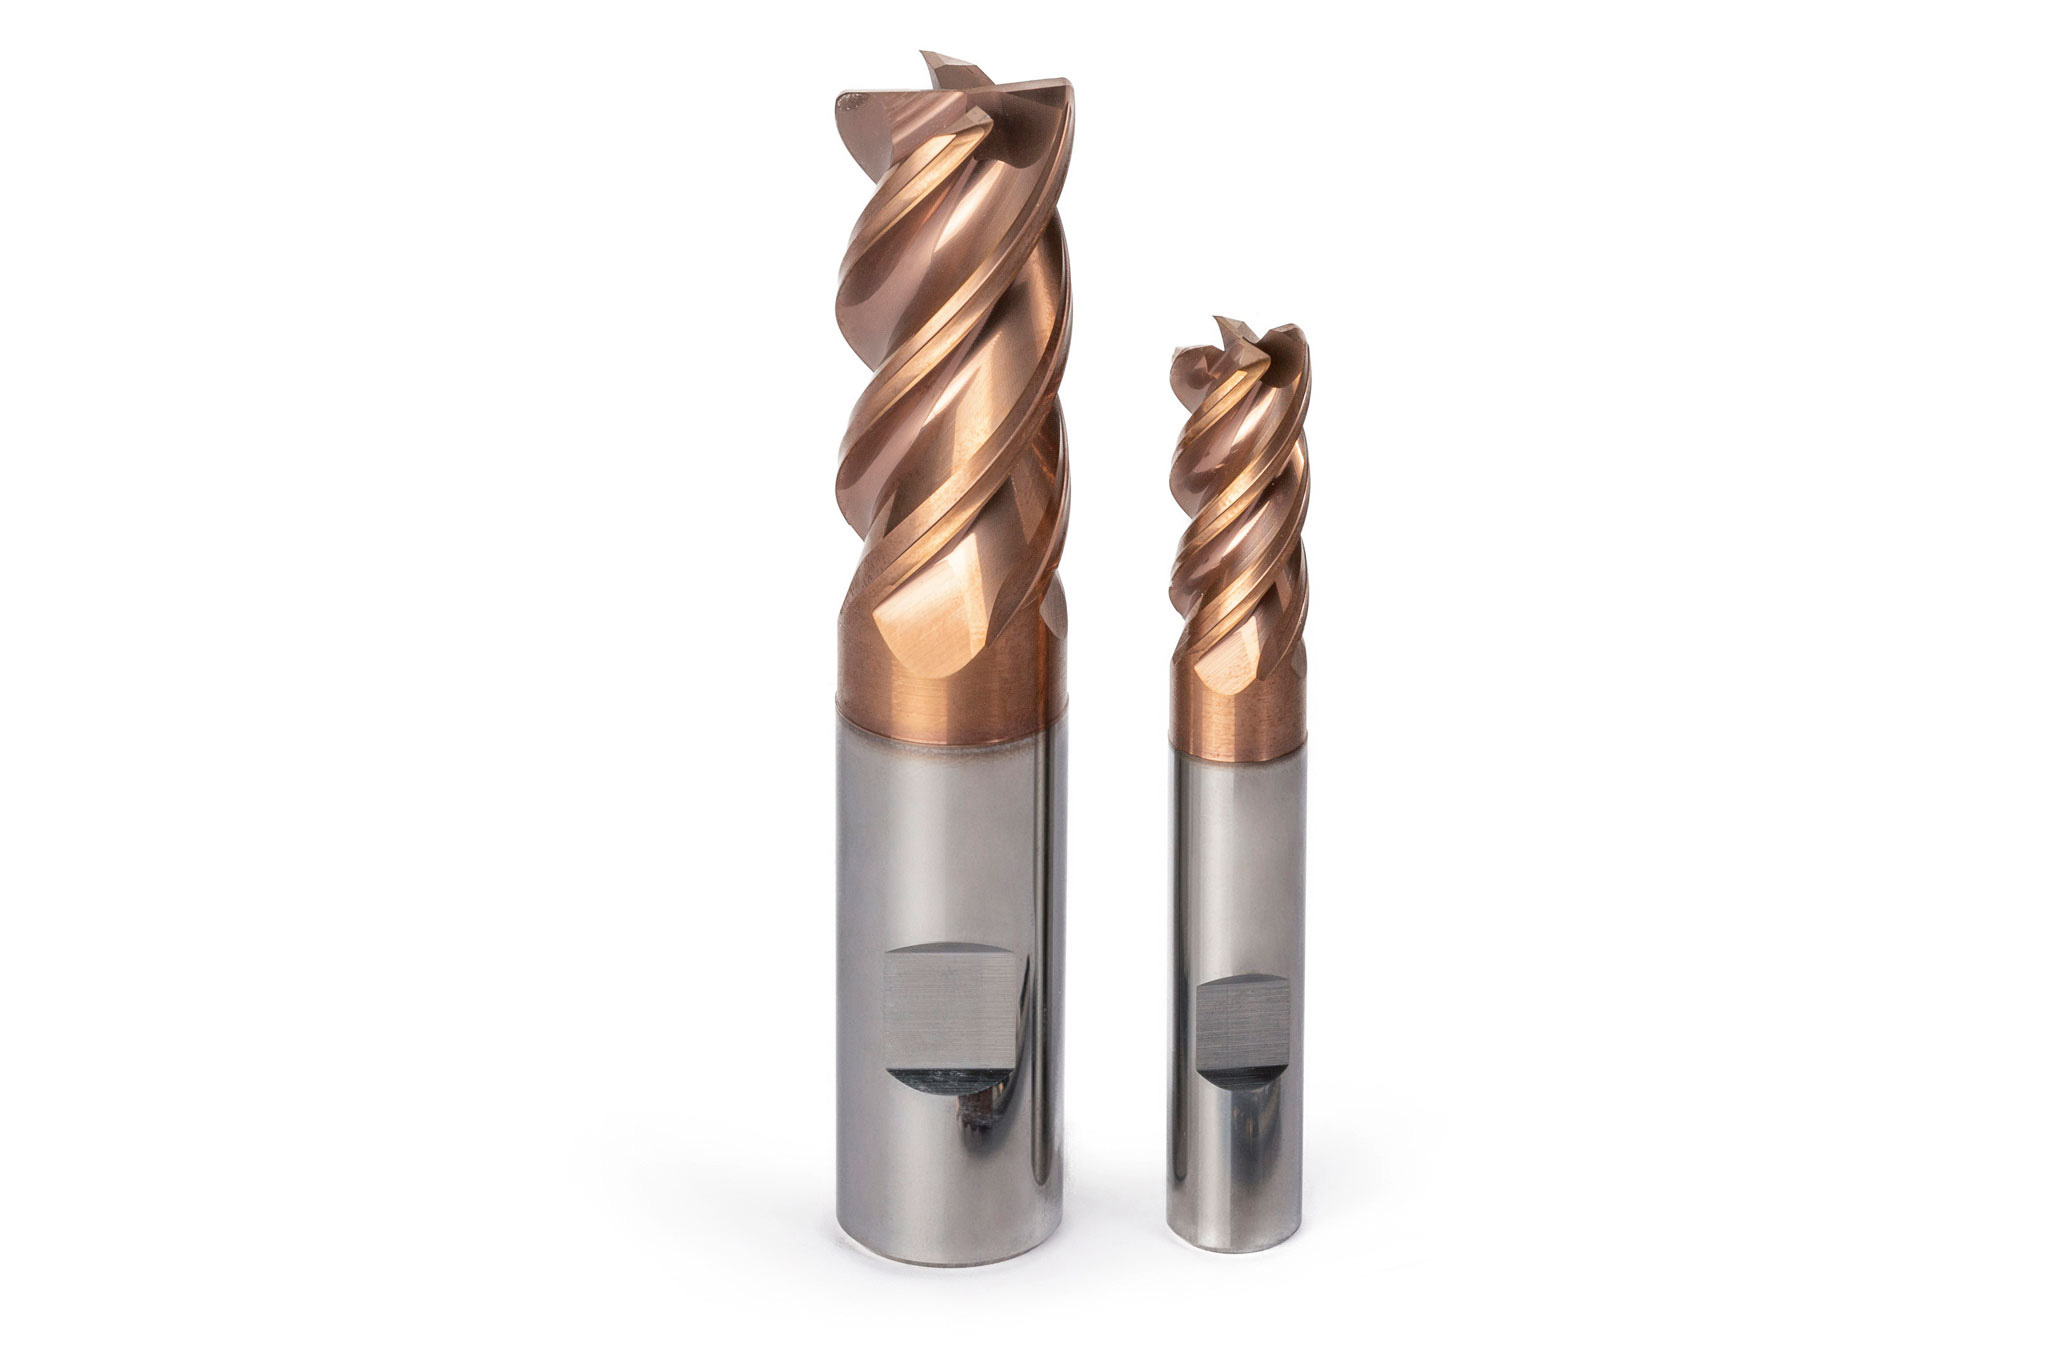 The solid carbide milling cutters OptiMill-Titan-HPC from MAPAL can be used both for roughing and for finish cuts in titanium.